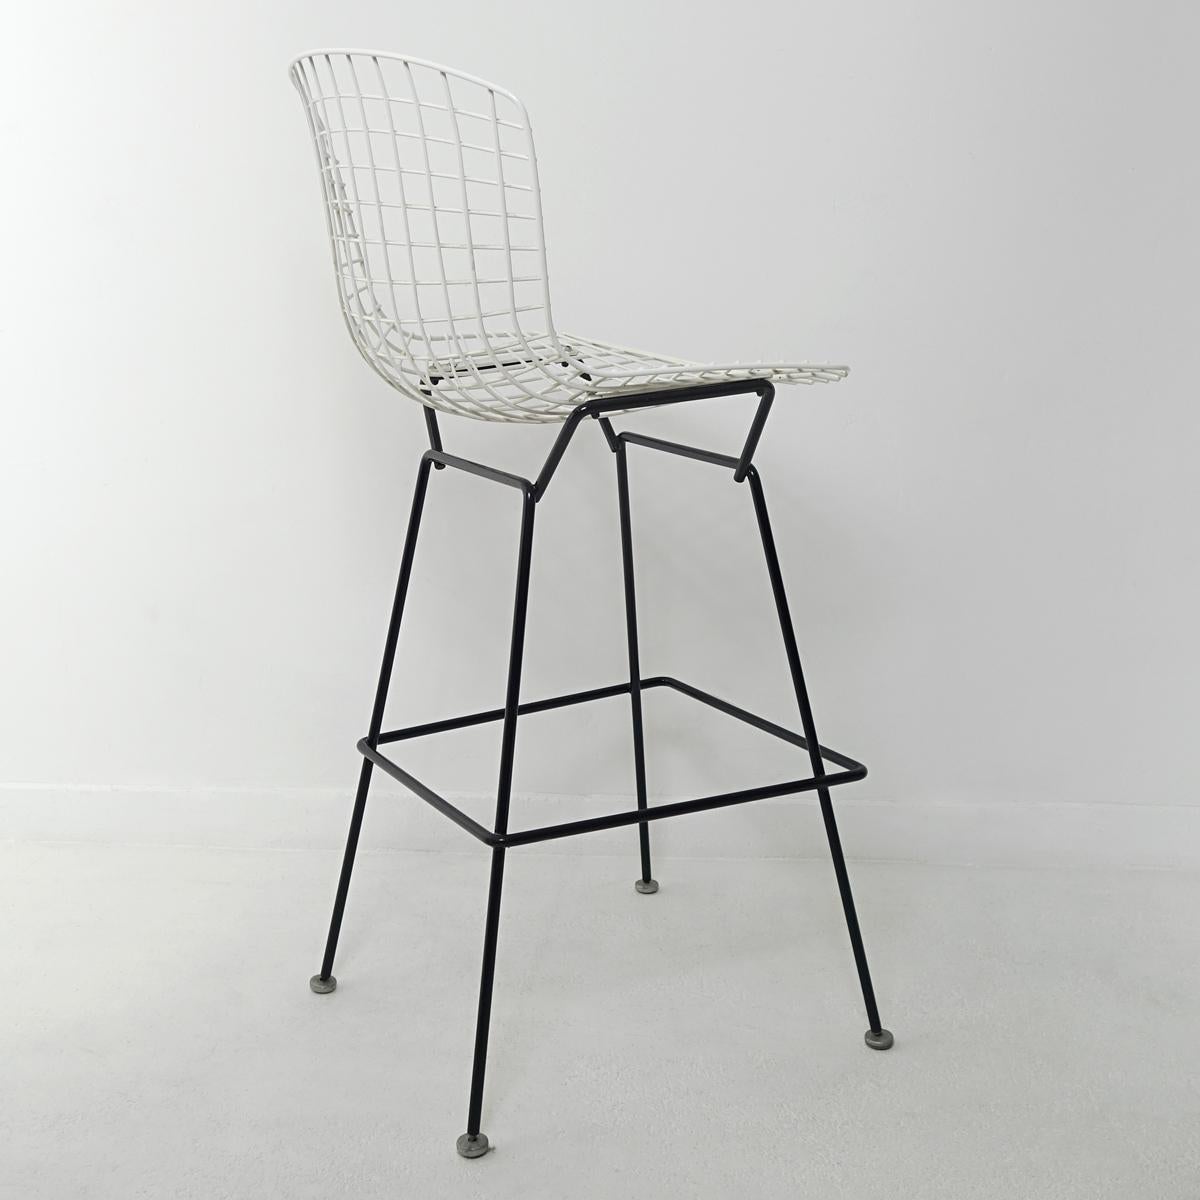 American Mid-Century Modern Set of 4 Wire Stools by Harry Bertoia for Knoll International